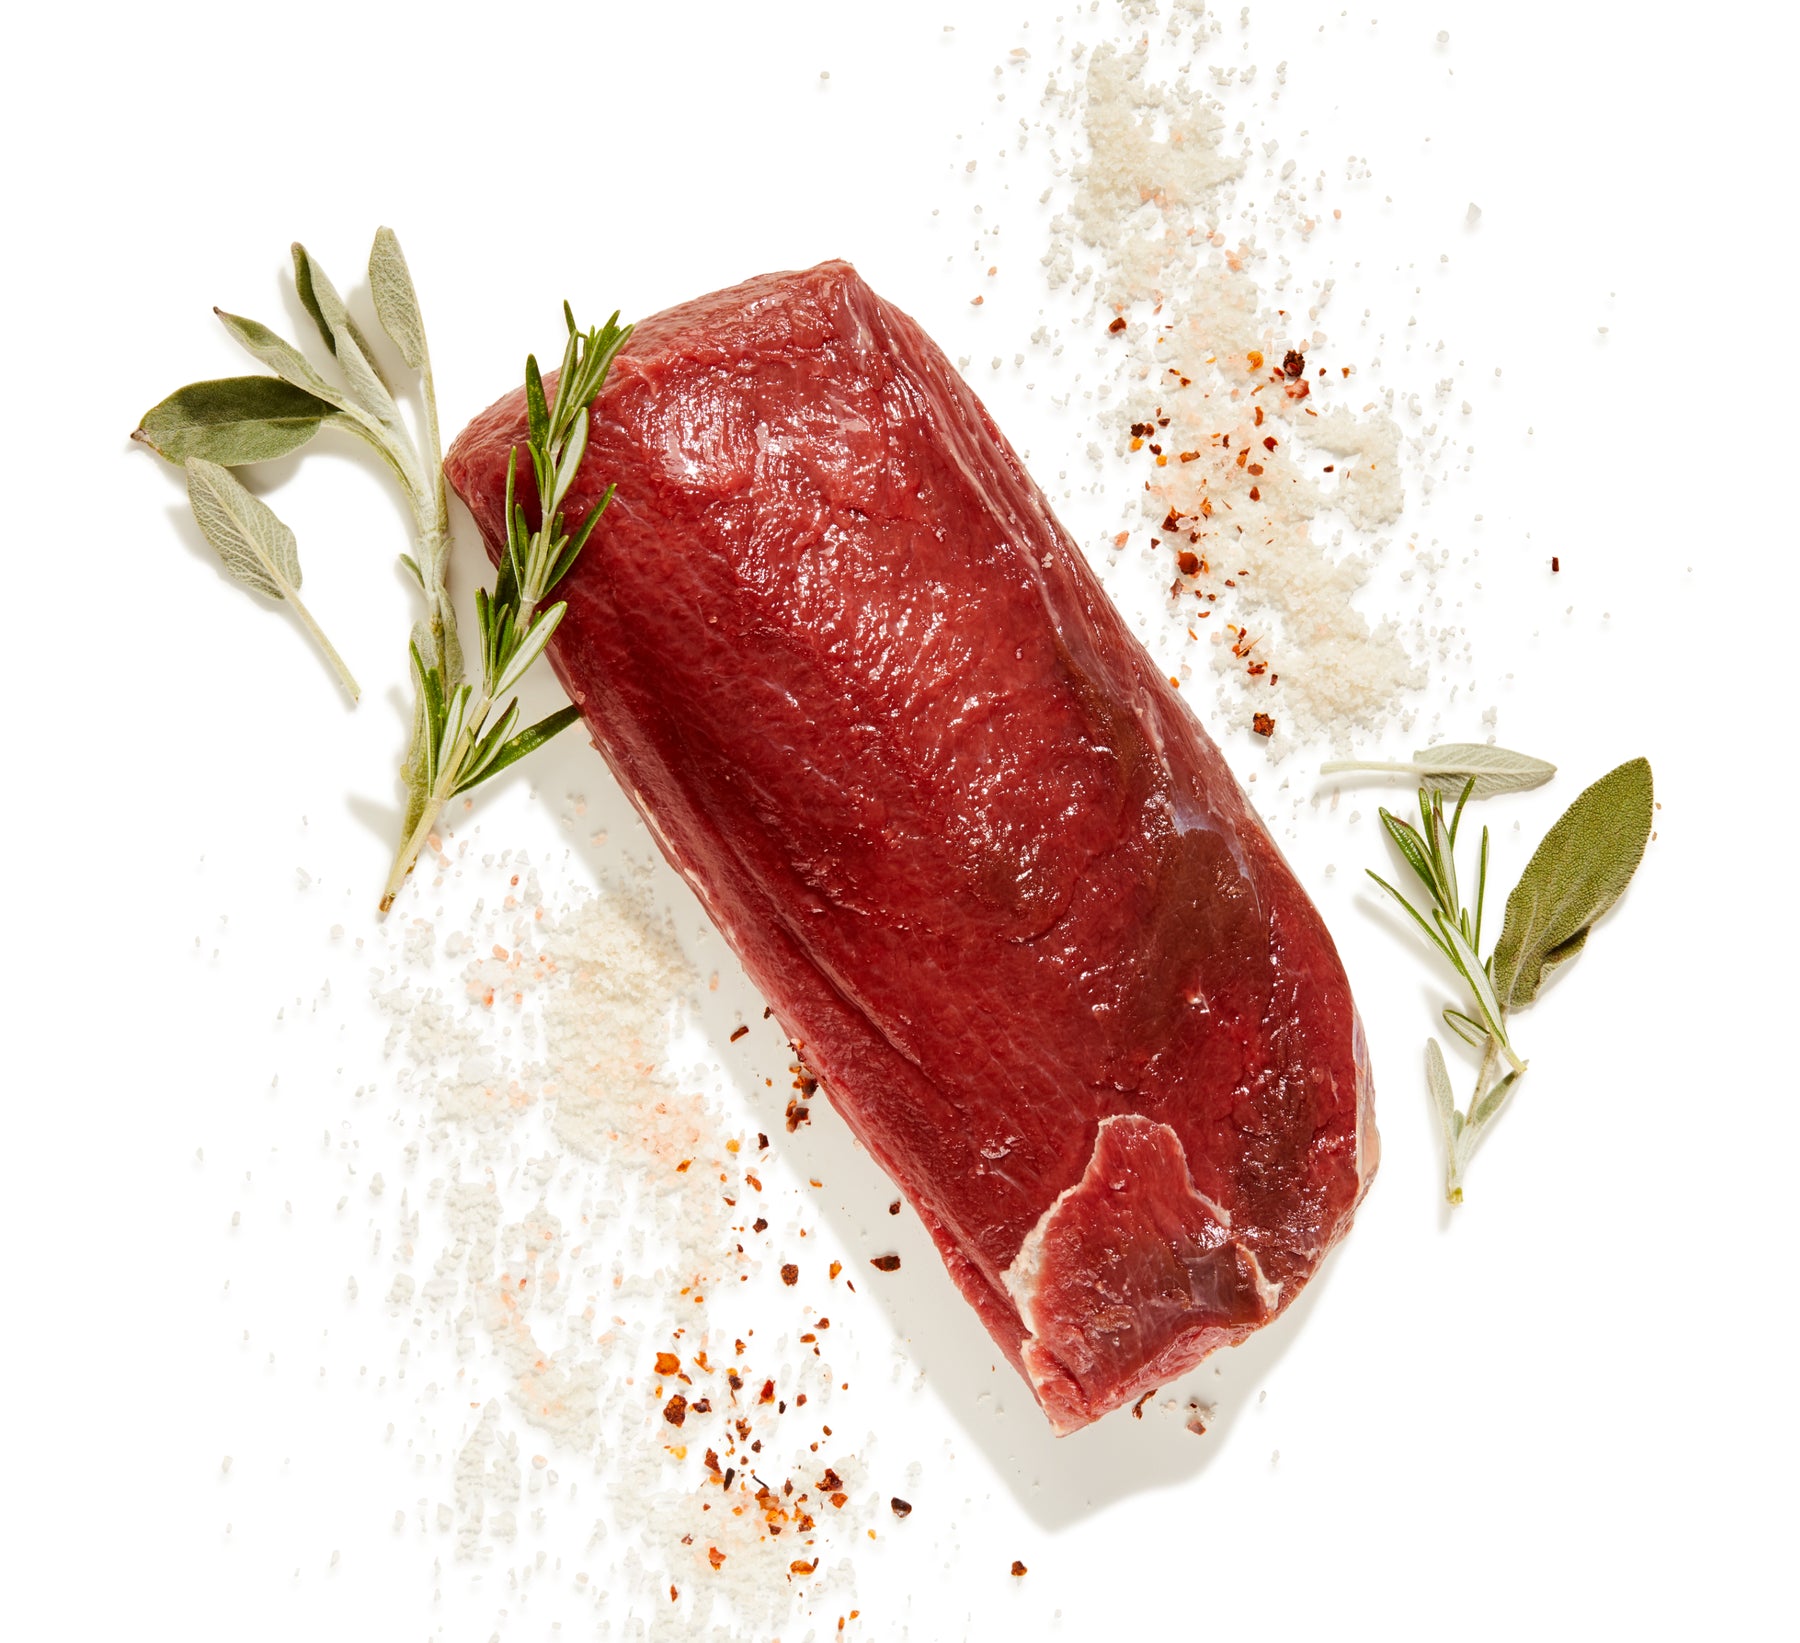 The Strip Loin Success Guide Raw Image